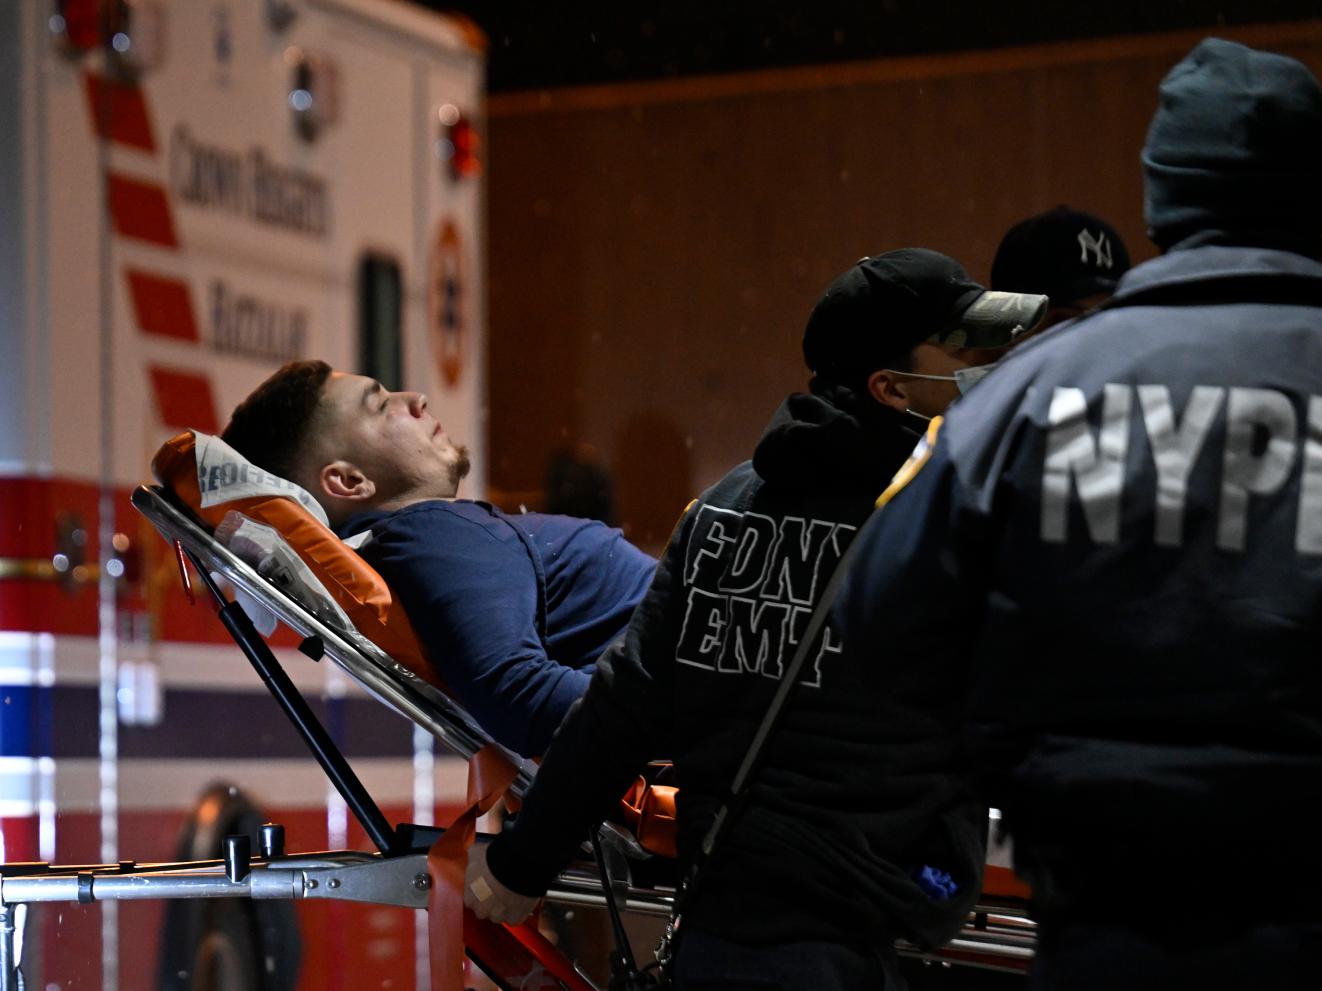 NYC weekend violence leaves 7 wounded, one in possible bias attack: NYPD